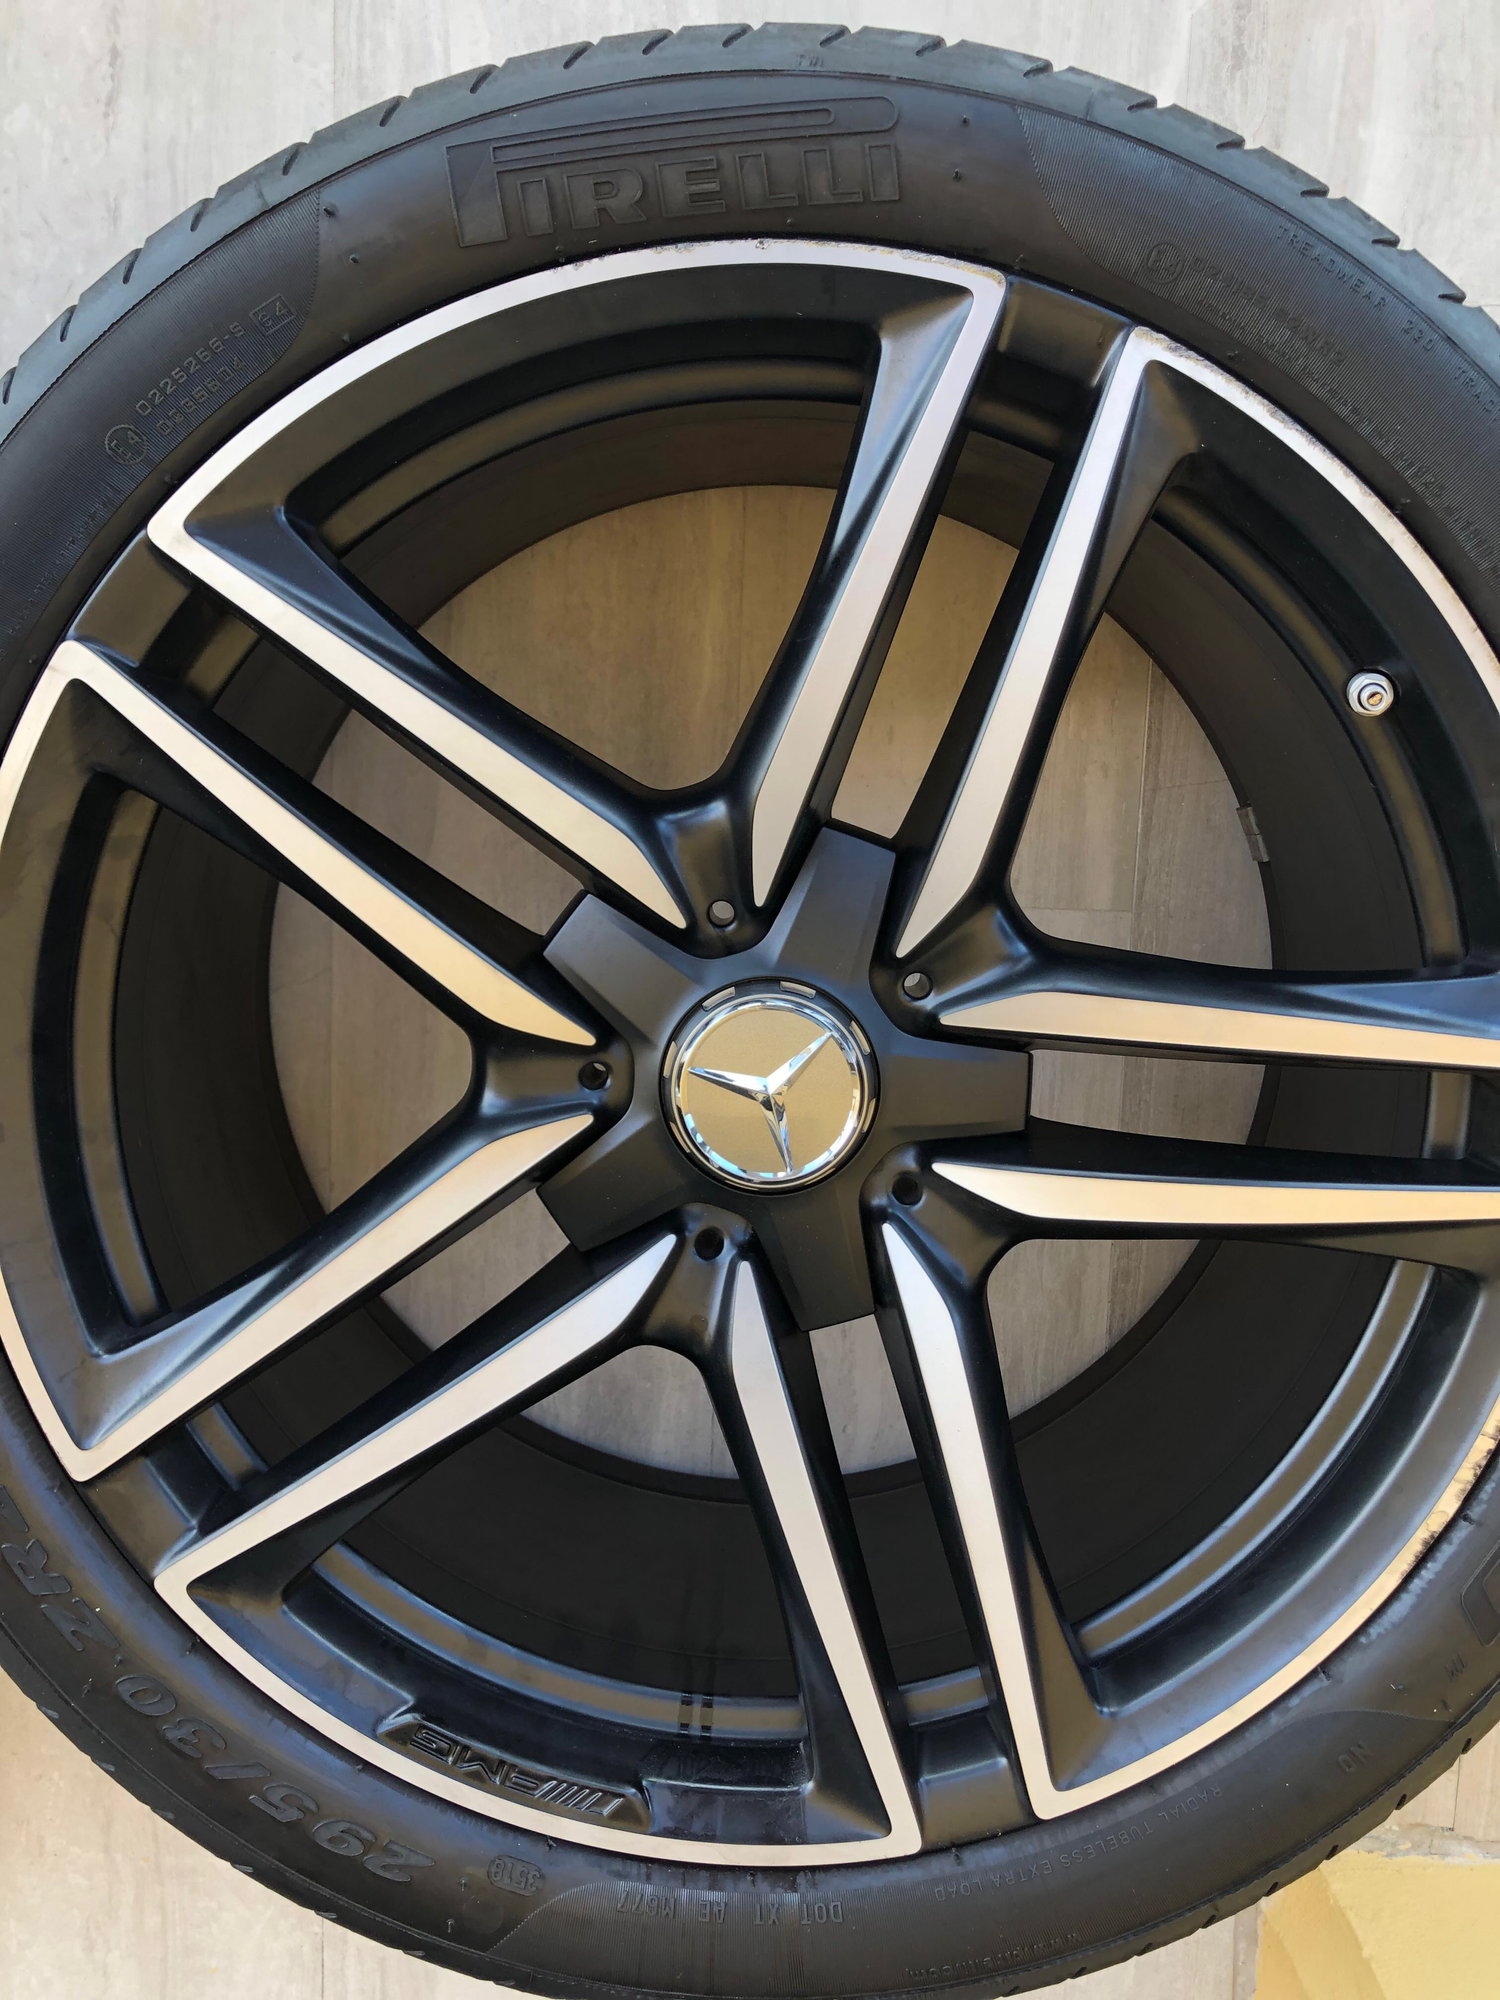 Wheels and Tires/Axles - 2018/19 E63S AMG Wheels W/ Pirelli Tires - Used - 2018 to 2019 Mercedes-Benz E63 AMG S - Hallandle Bch, FL 33009, United States